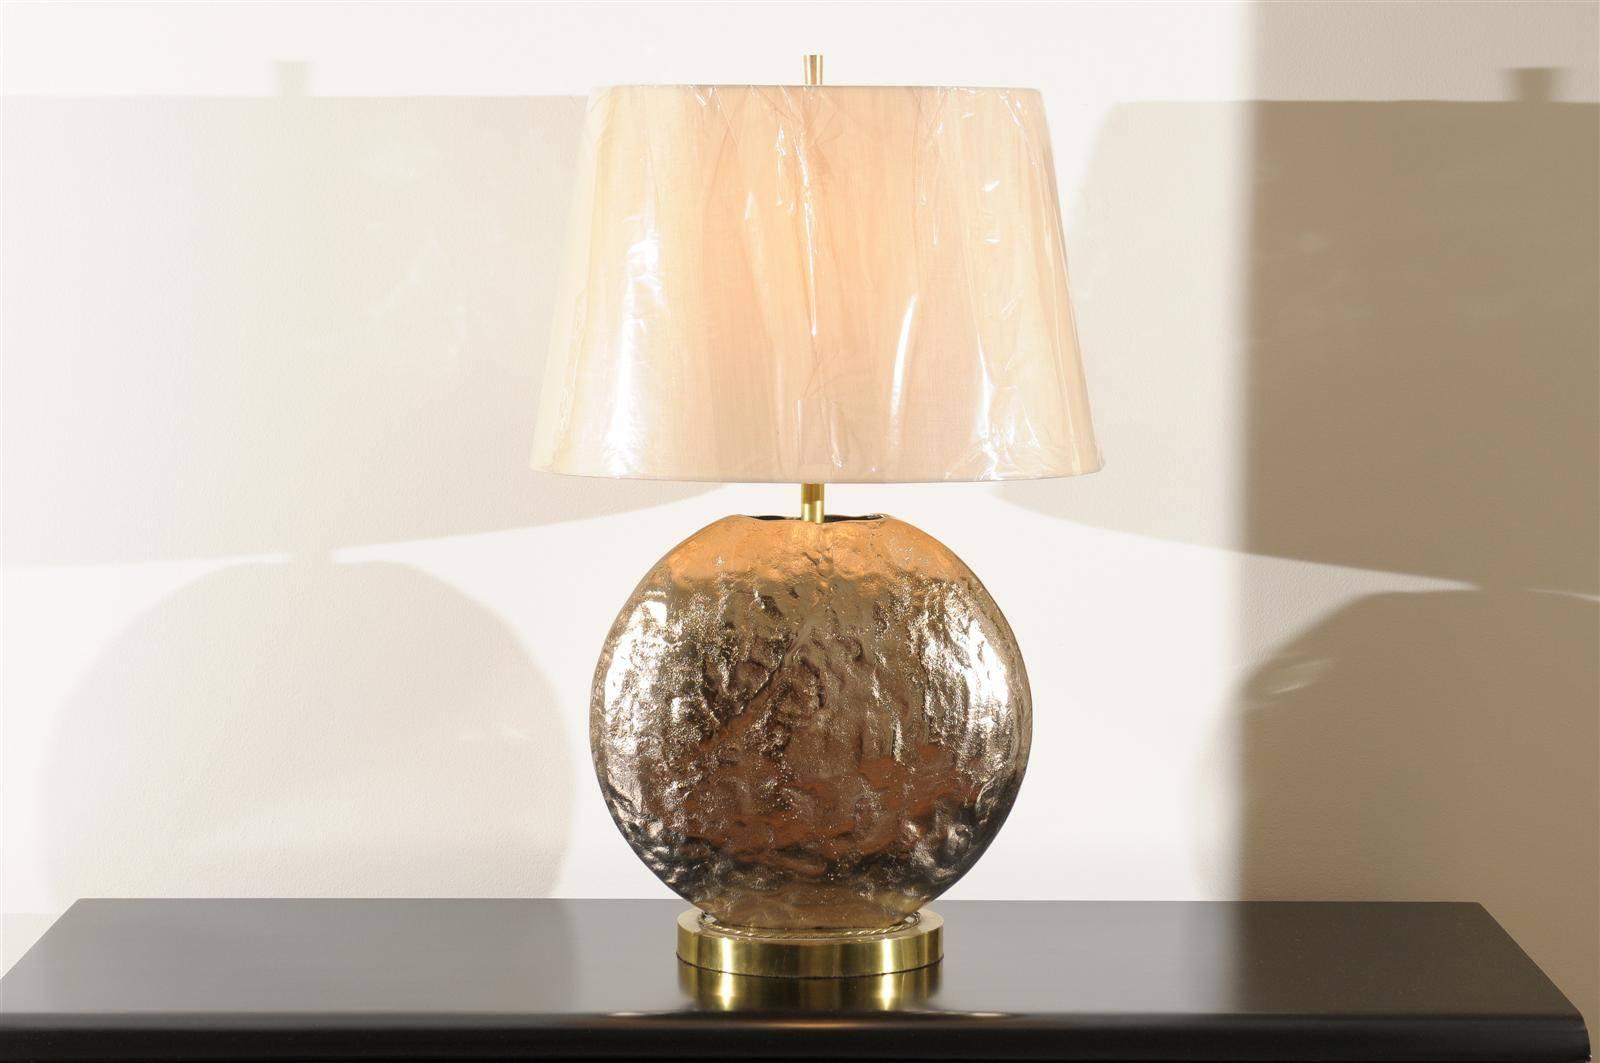 A fabulous pair of vintage medallion style lamps, circa 1975. Textured cast steel with a Champagne finish on a oval base of brass. Heavy, beautifully crafted pieces which emit a sophisticated Brutalist vibe. Statement jewelry ! Excellent restored